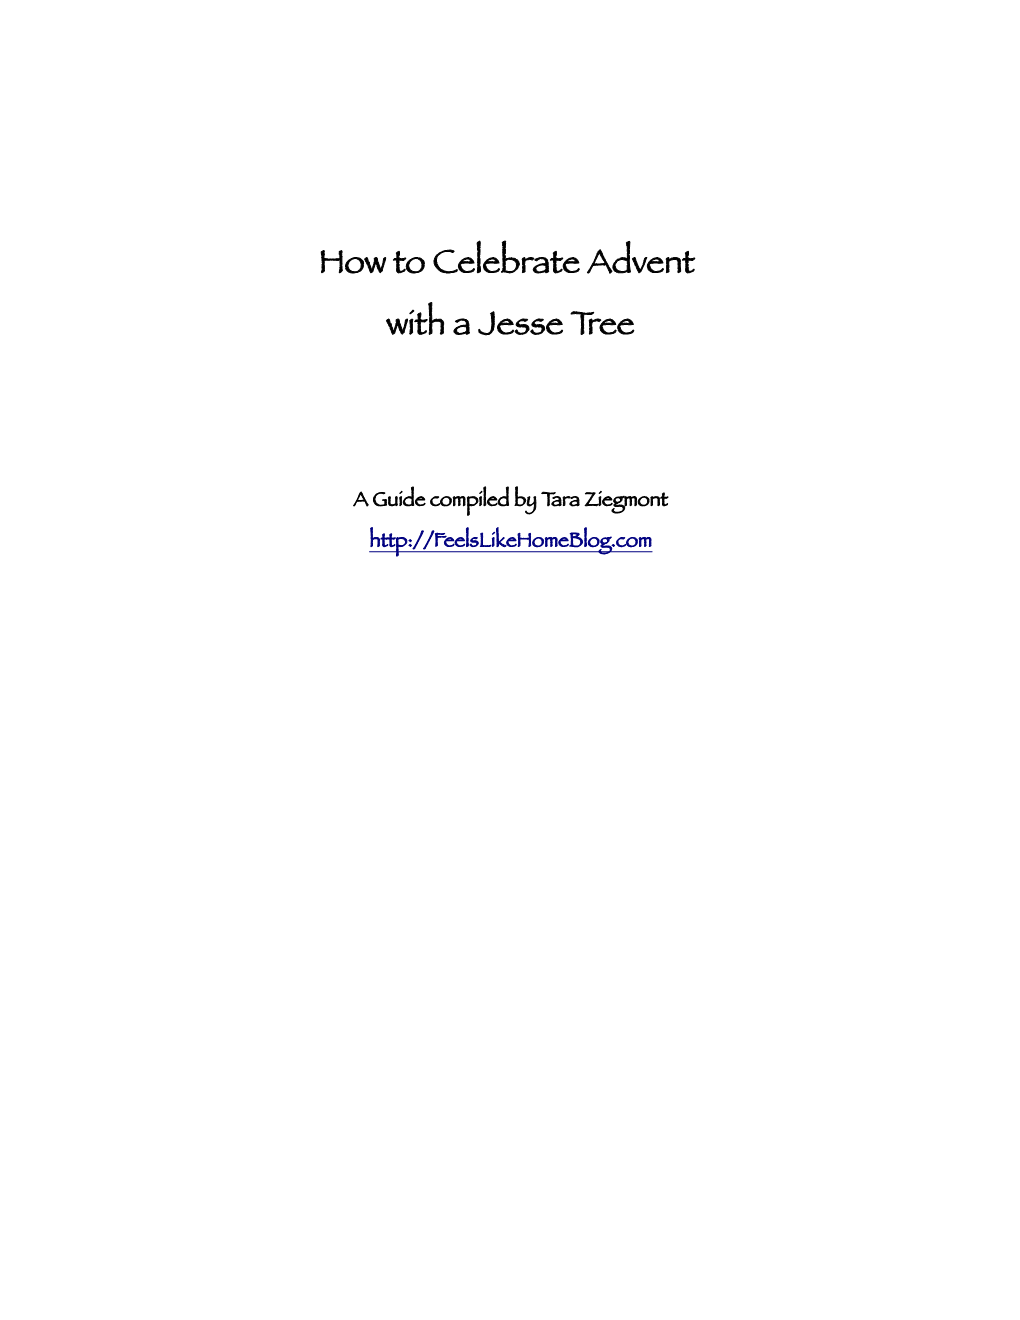 How to Celebrate Advent with a Jesse Tree